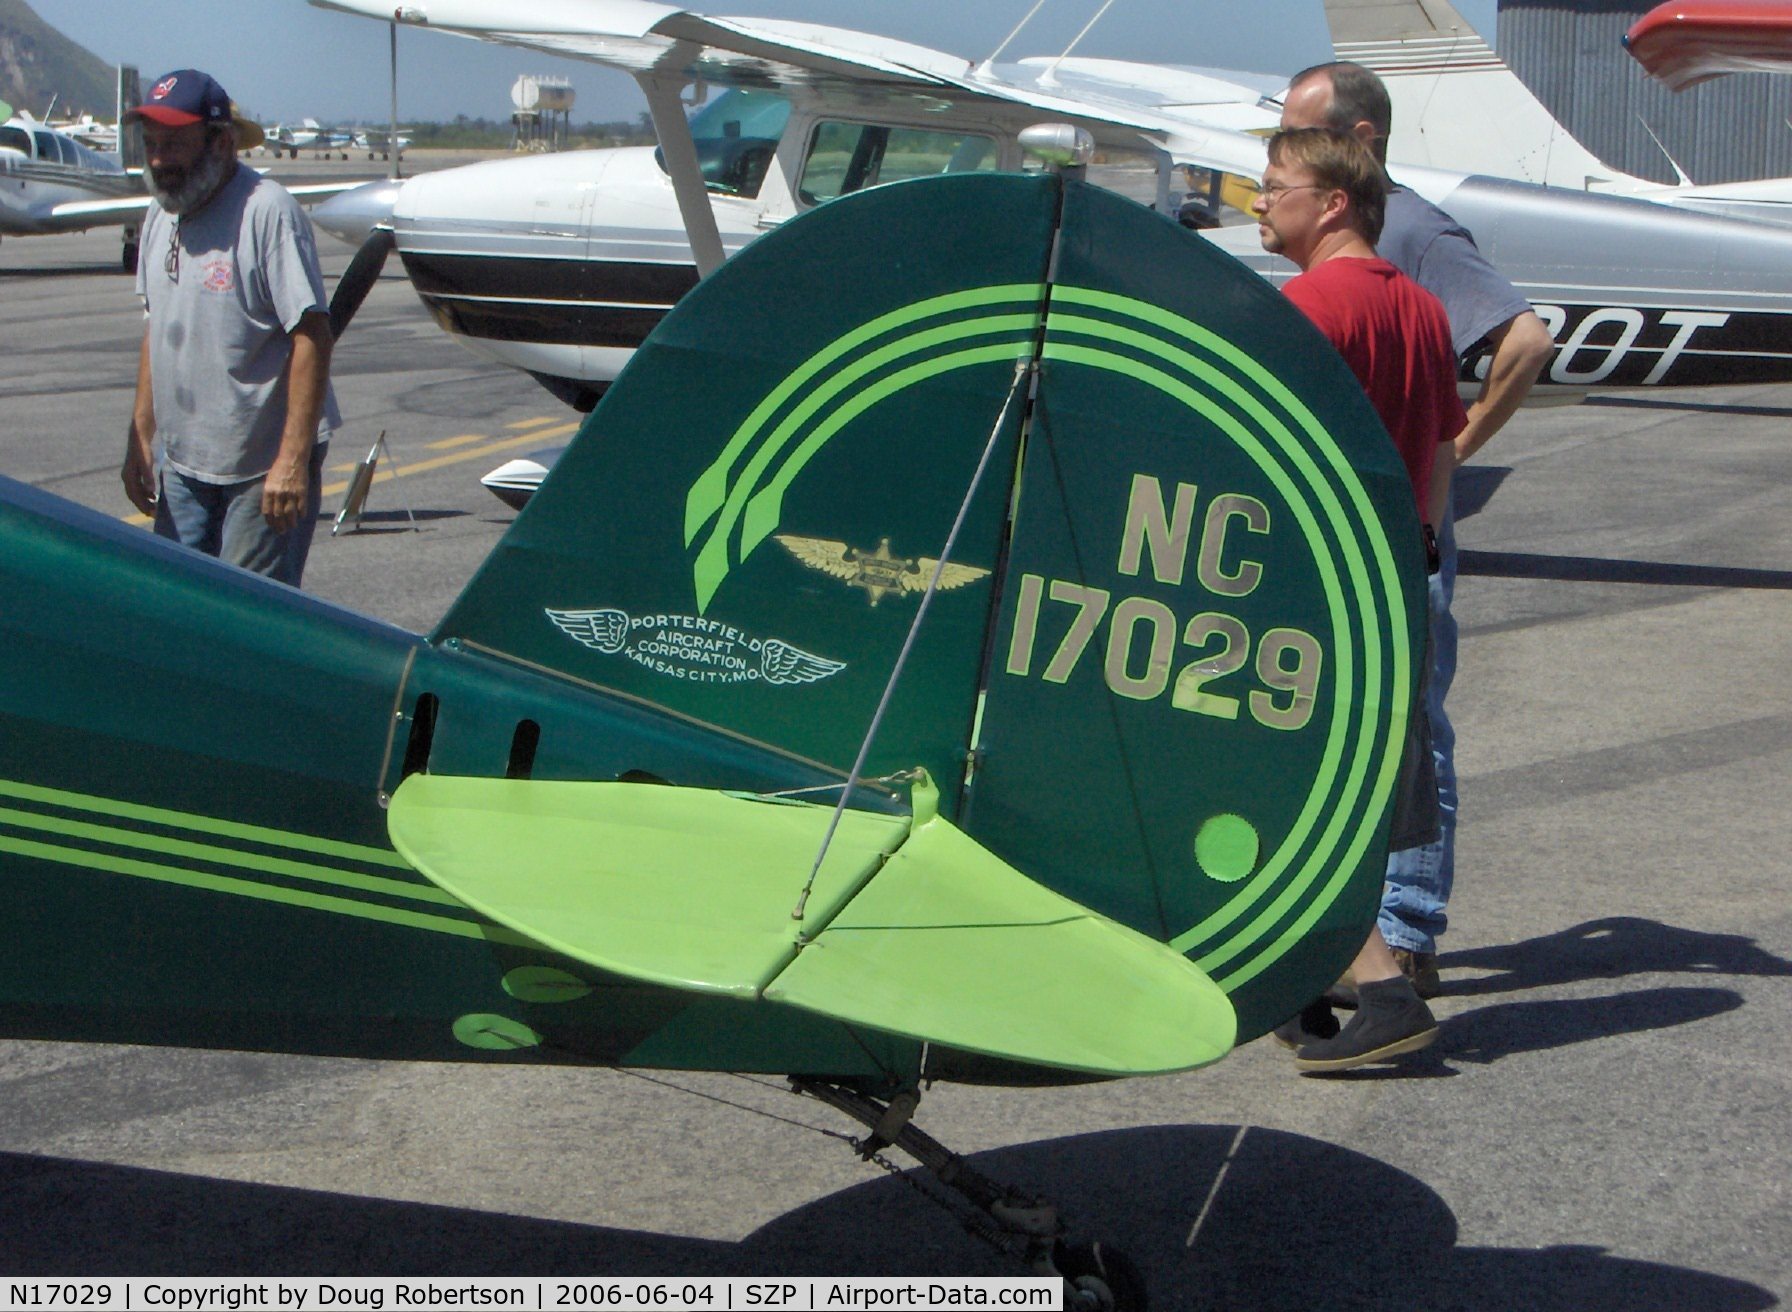 N17029, 1936 Porterfield 35-70 Flyabout C/N 229, 1936 Porterfield 35-70 Flyabout, LeBlond 70 Hp 5 cylinder air-cooled radial, 'Spinach's' colorful tail with adjustable trim horizontal stabilizer